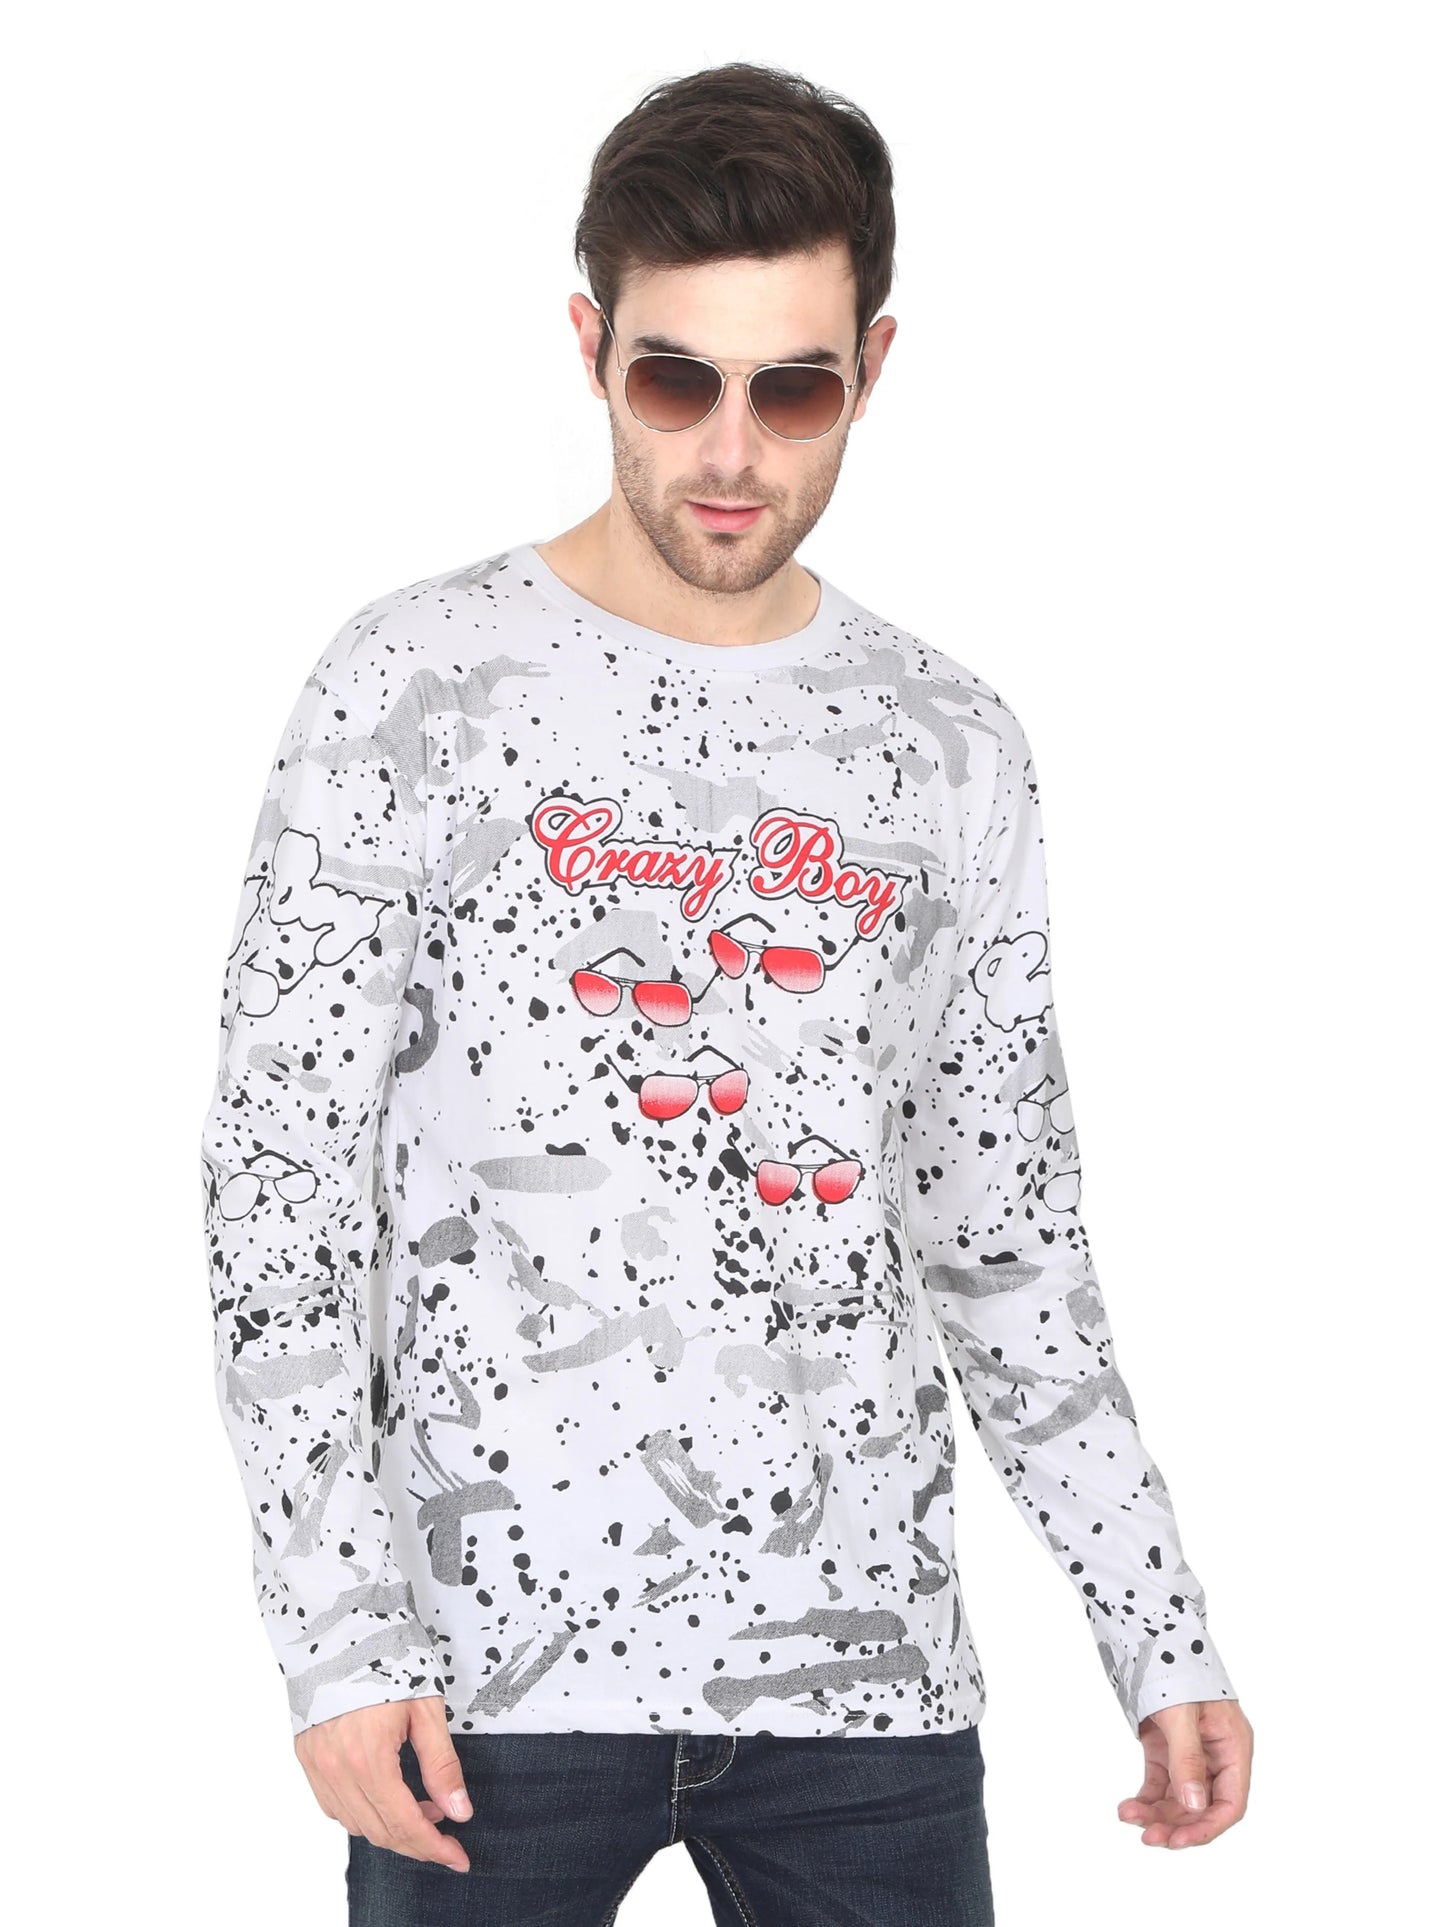 Men's Cotton Round Neck Full Sleeve All Over Printed T-Shirt - Fleximaa